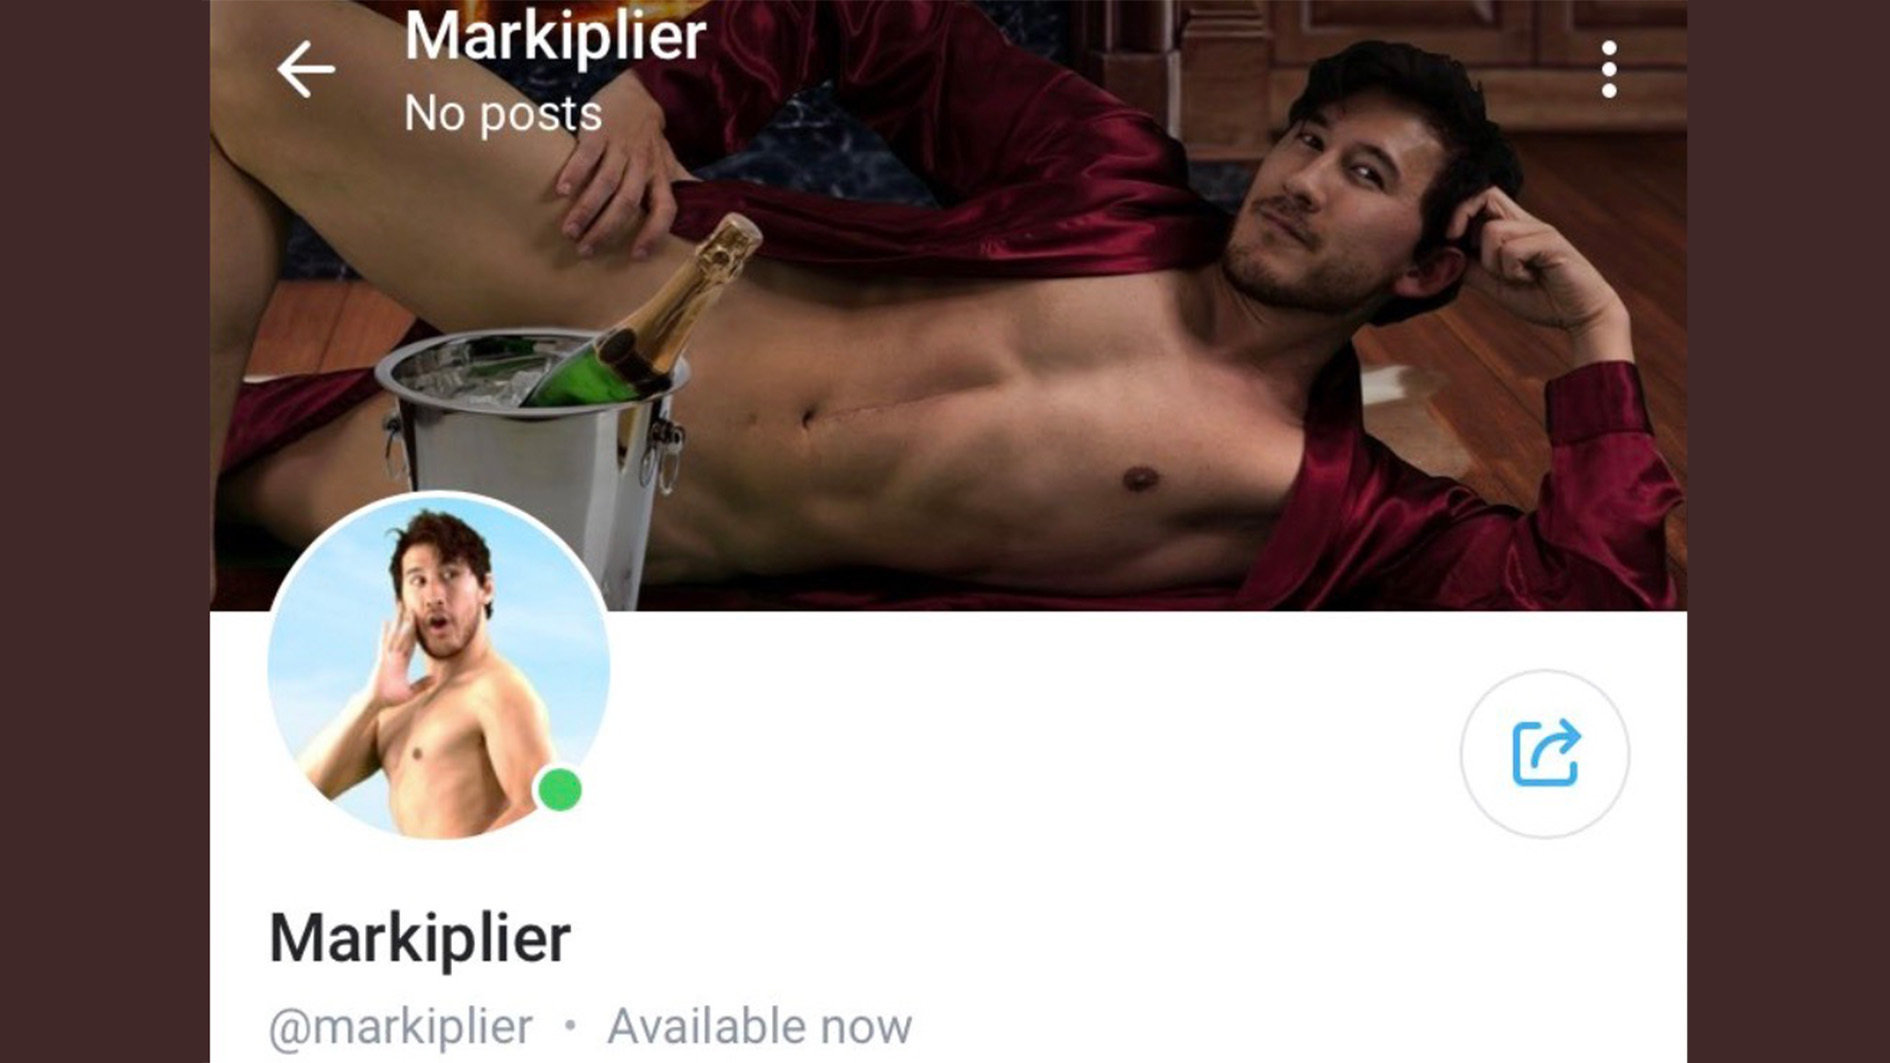 Vip What Does Markiplier Do On His Onlyfans